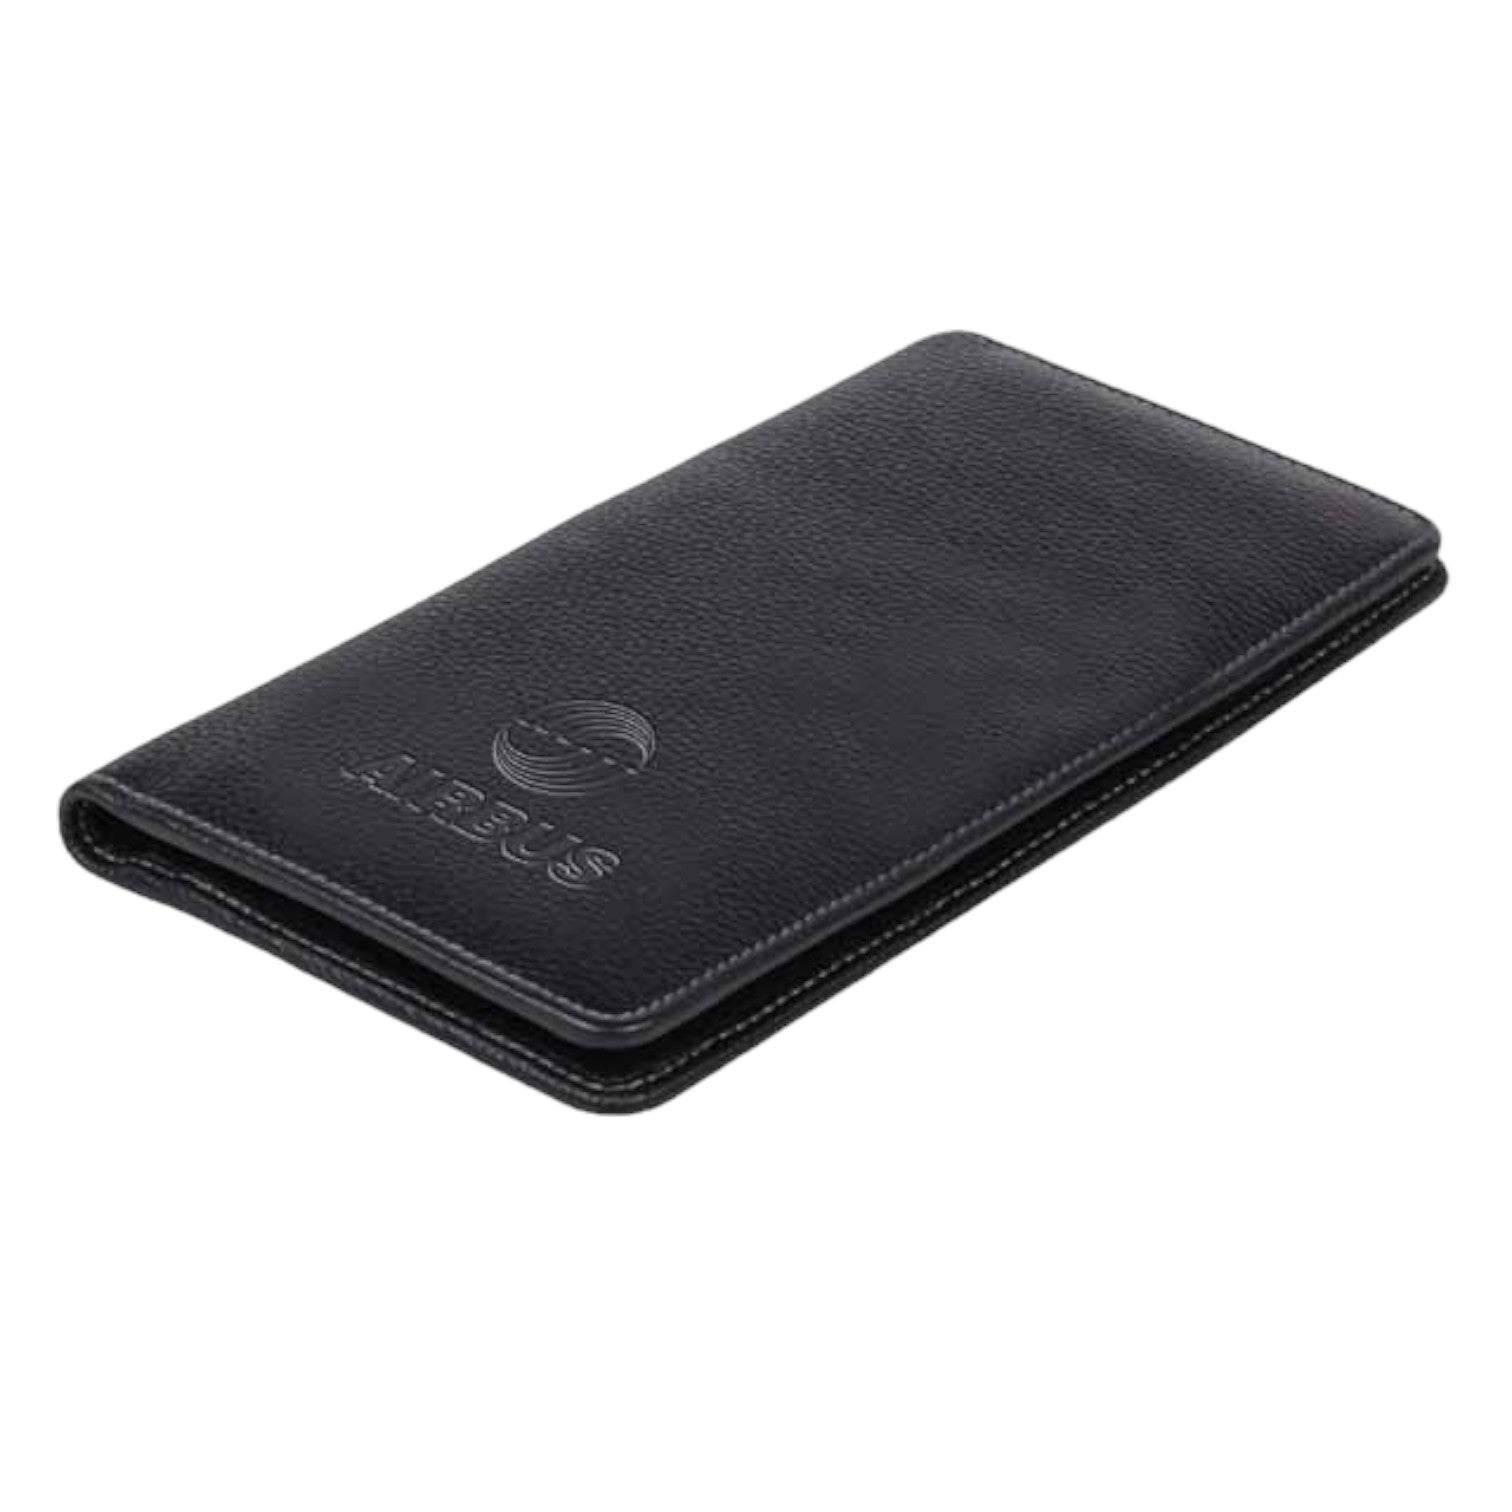 Genuine Leather Suit Coat Wallet With RFID Protection